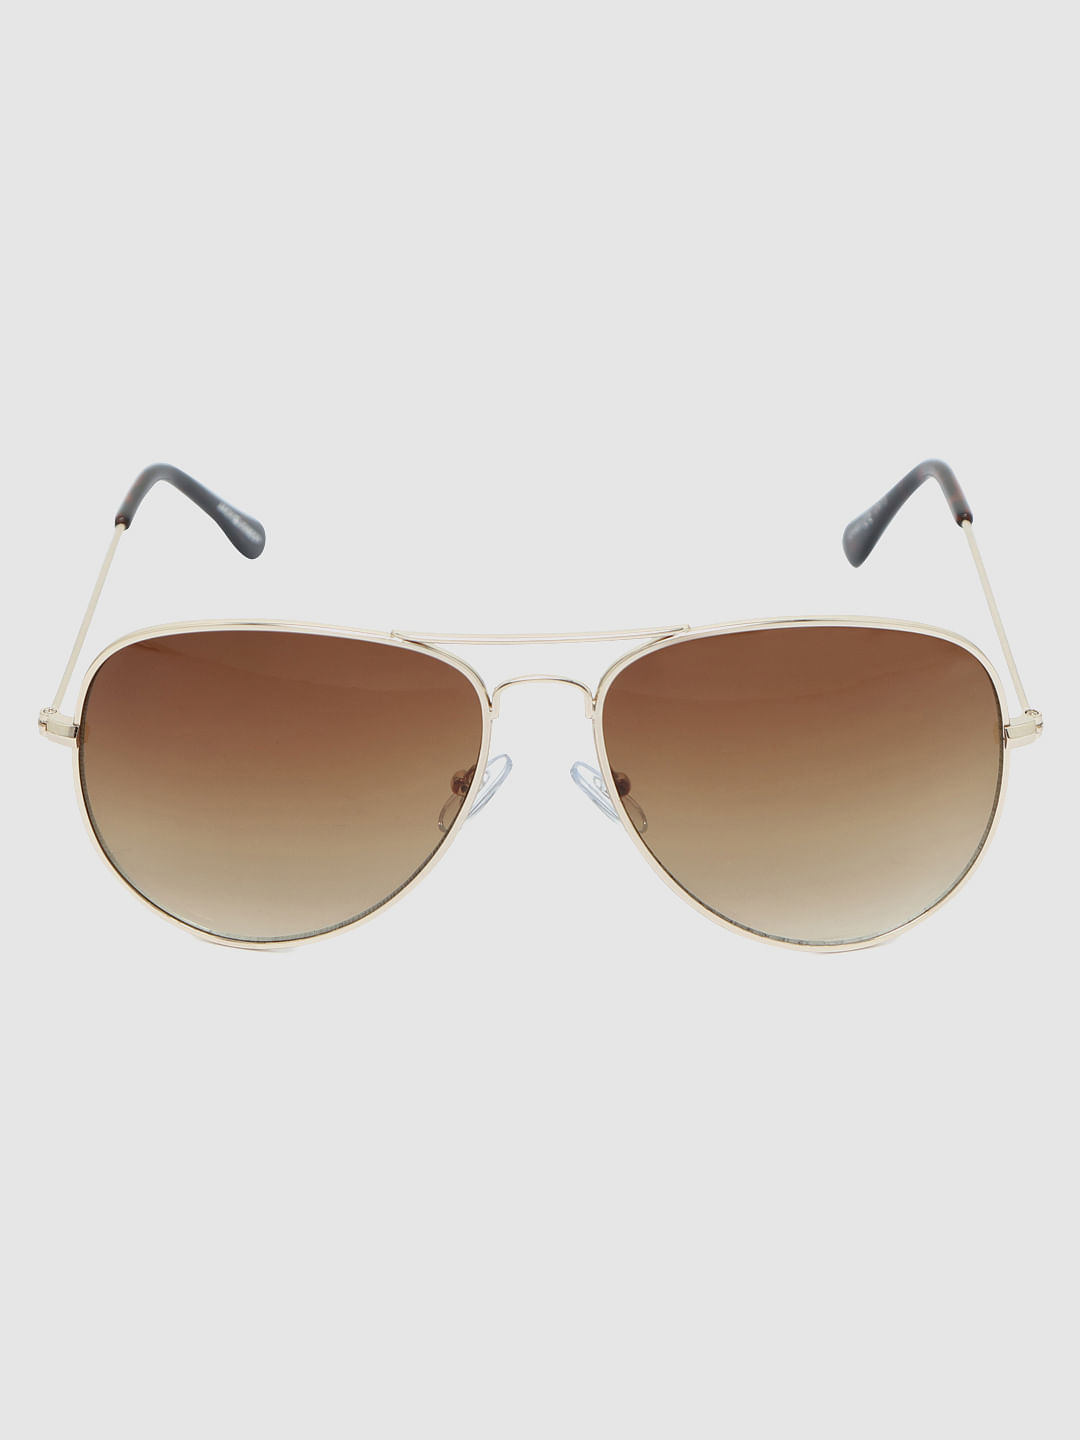 Buy Malacca Wooden Sunglass - Handcrafted Unisex Online on Brown Living |  Womens Sunglasses